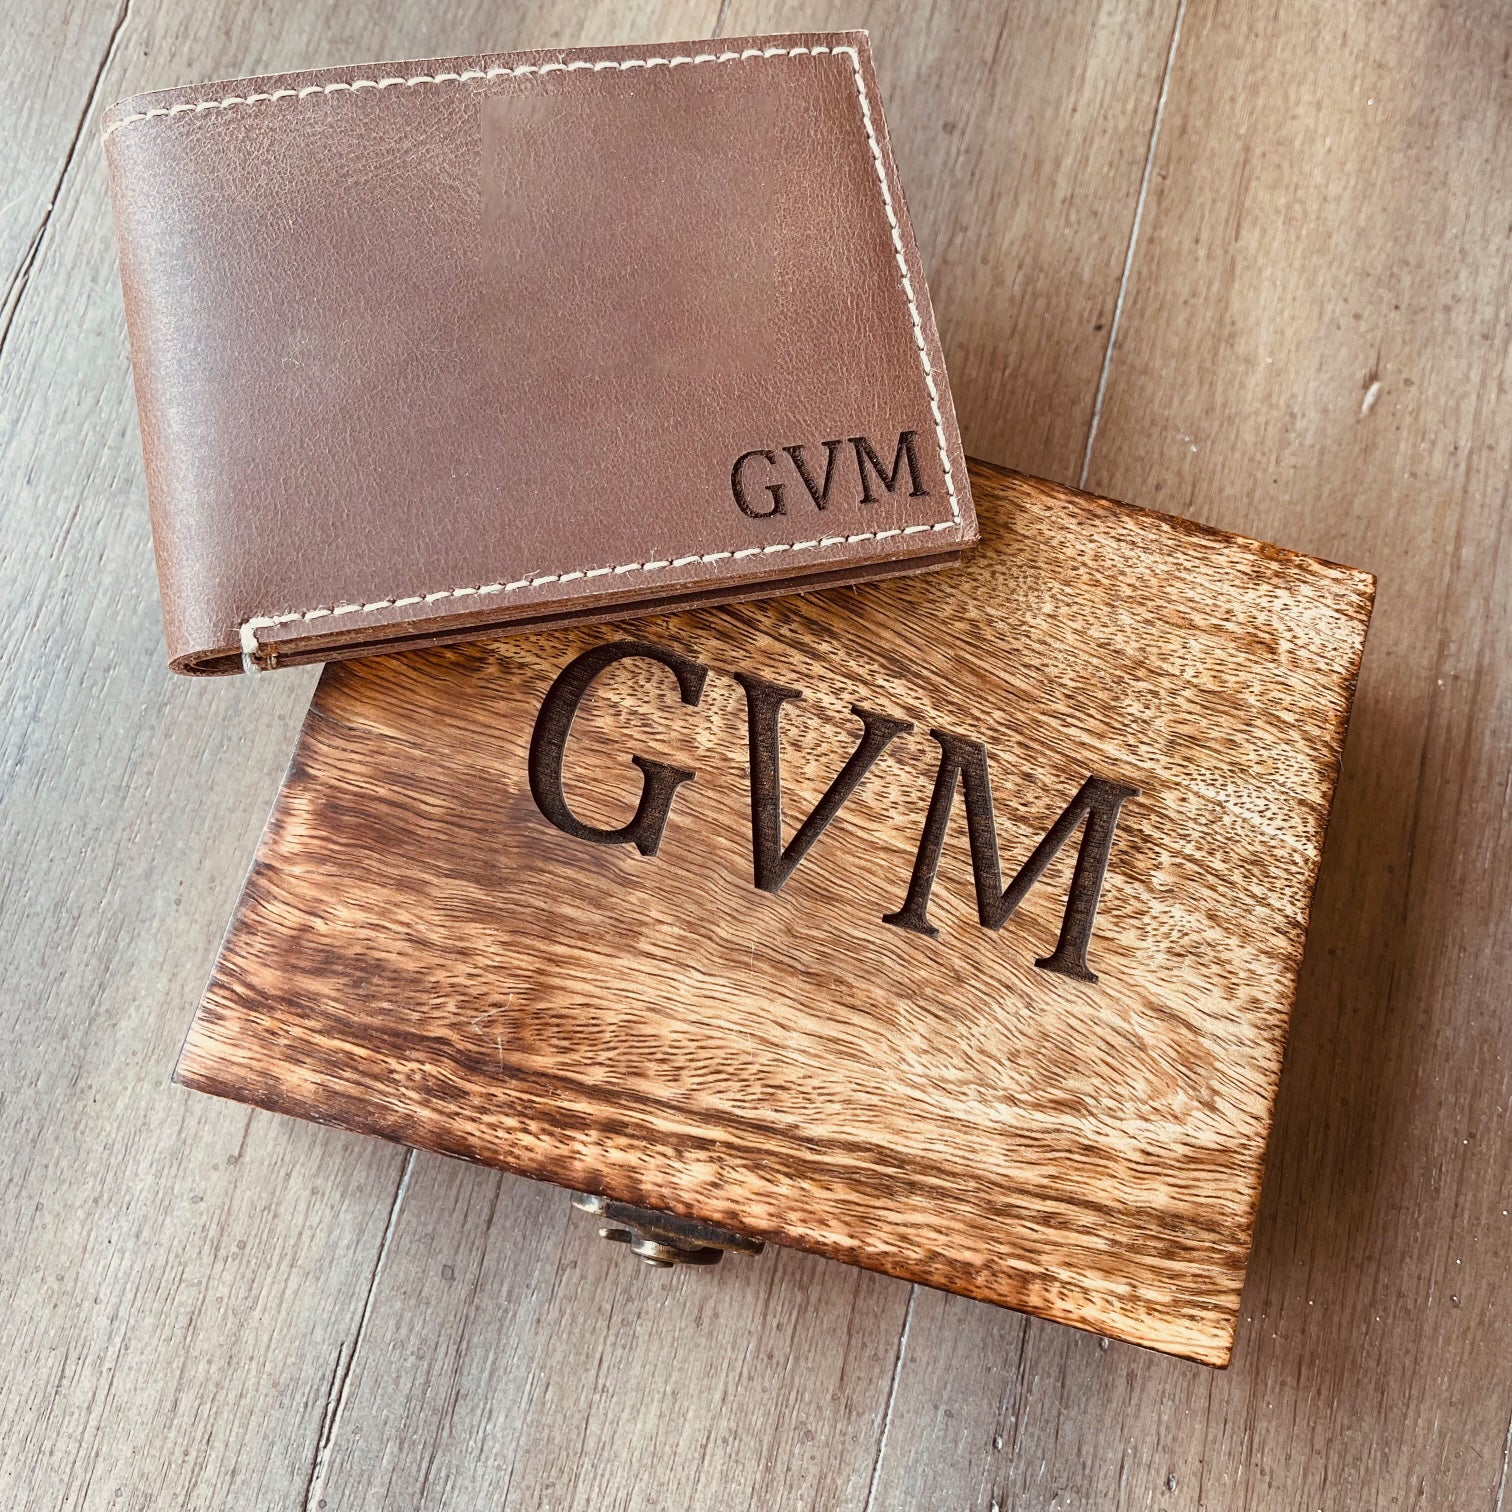 Personalized Leather Wallet - Engraved Leather Wallet Initial/Name